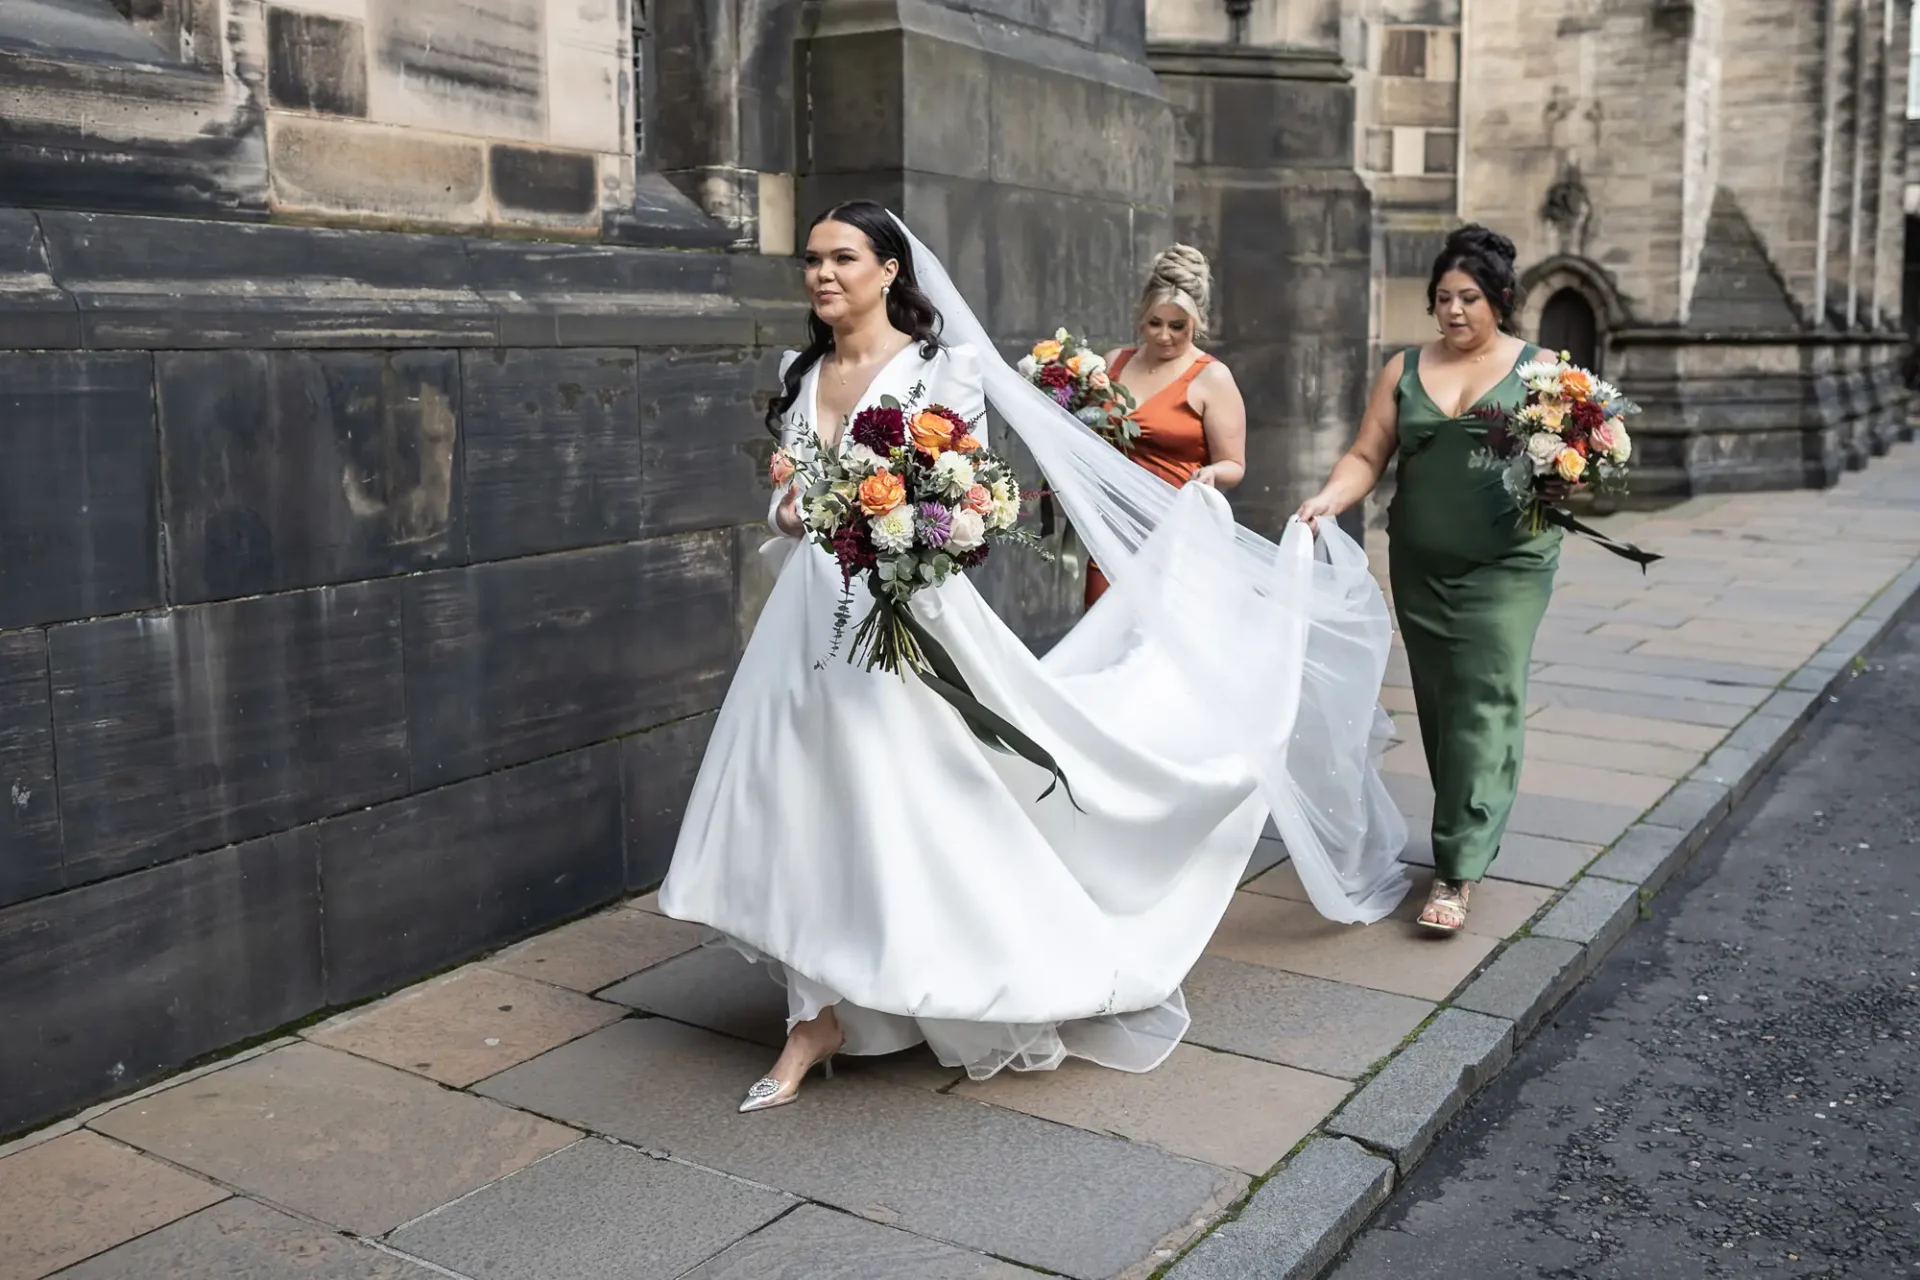 A bride in a white dress leads two bridesmaids carrying bouquets down a city street; one bridesmaid is adjusting the bride's train.